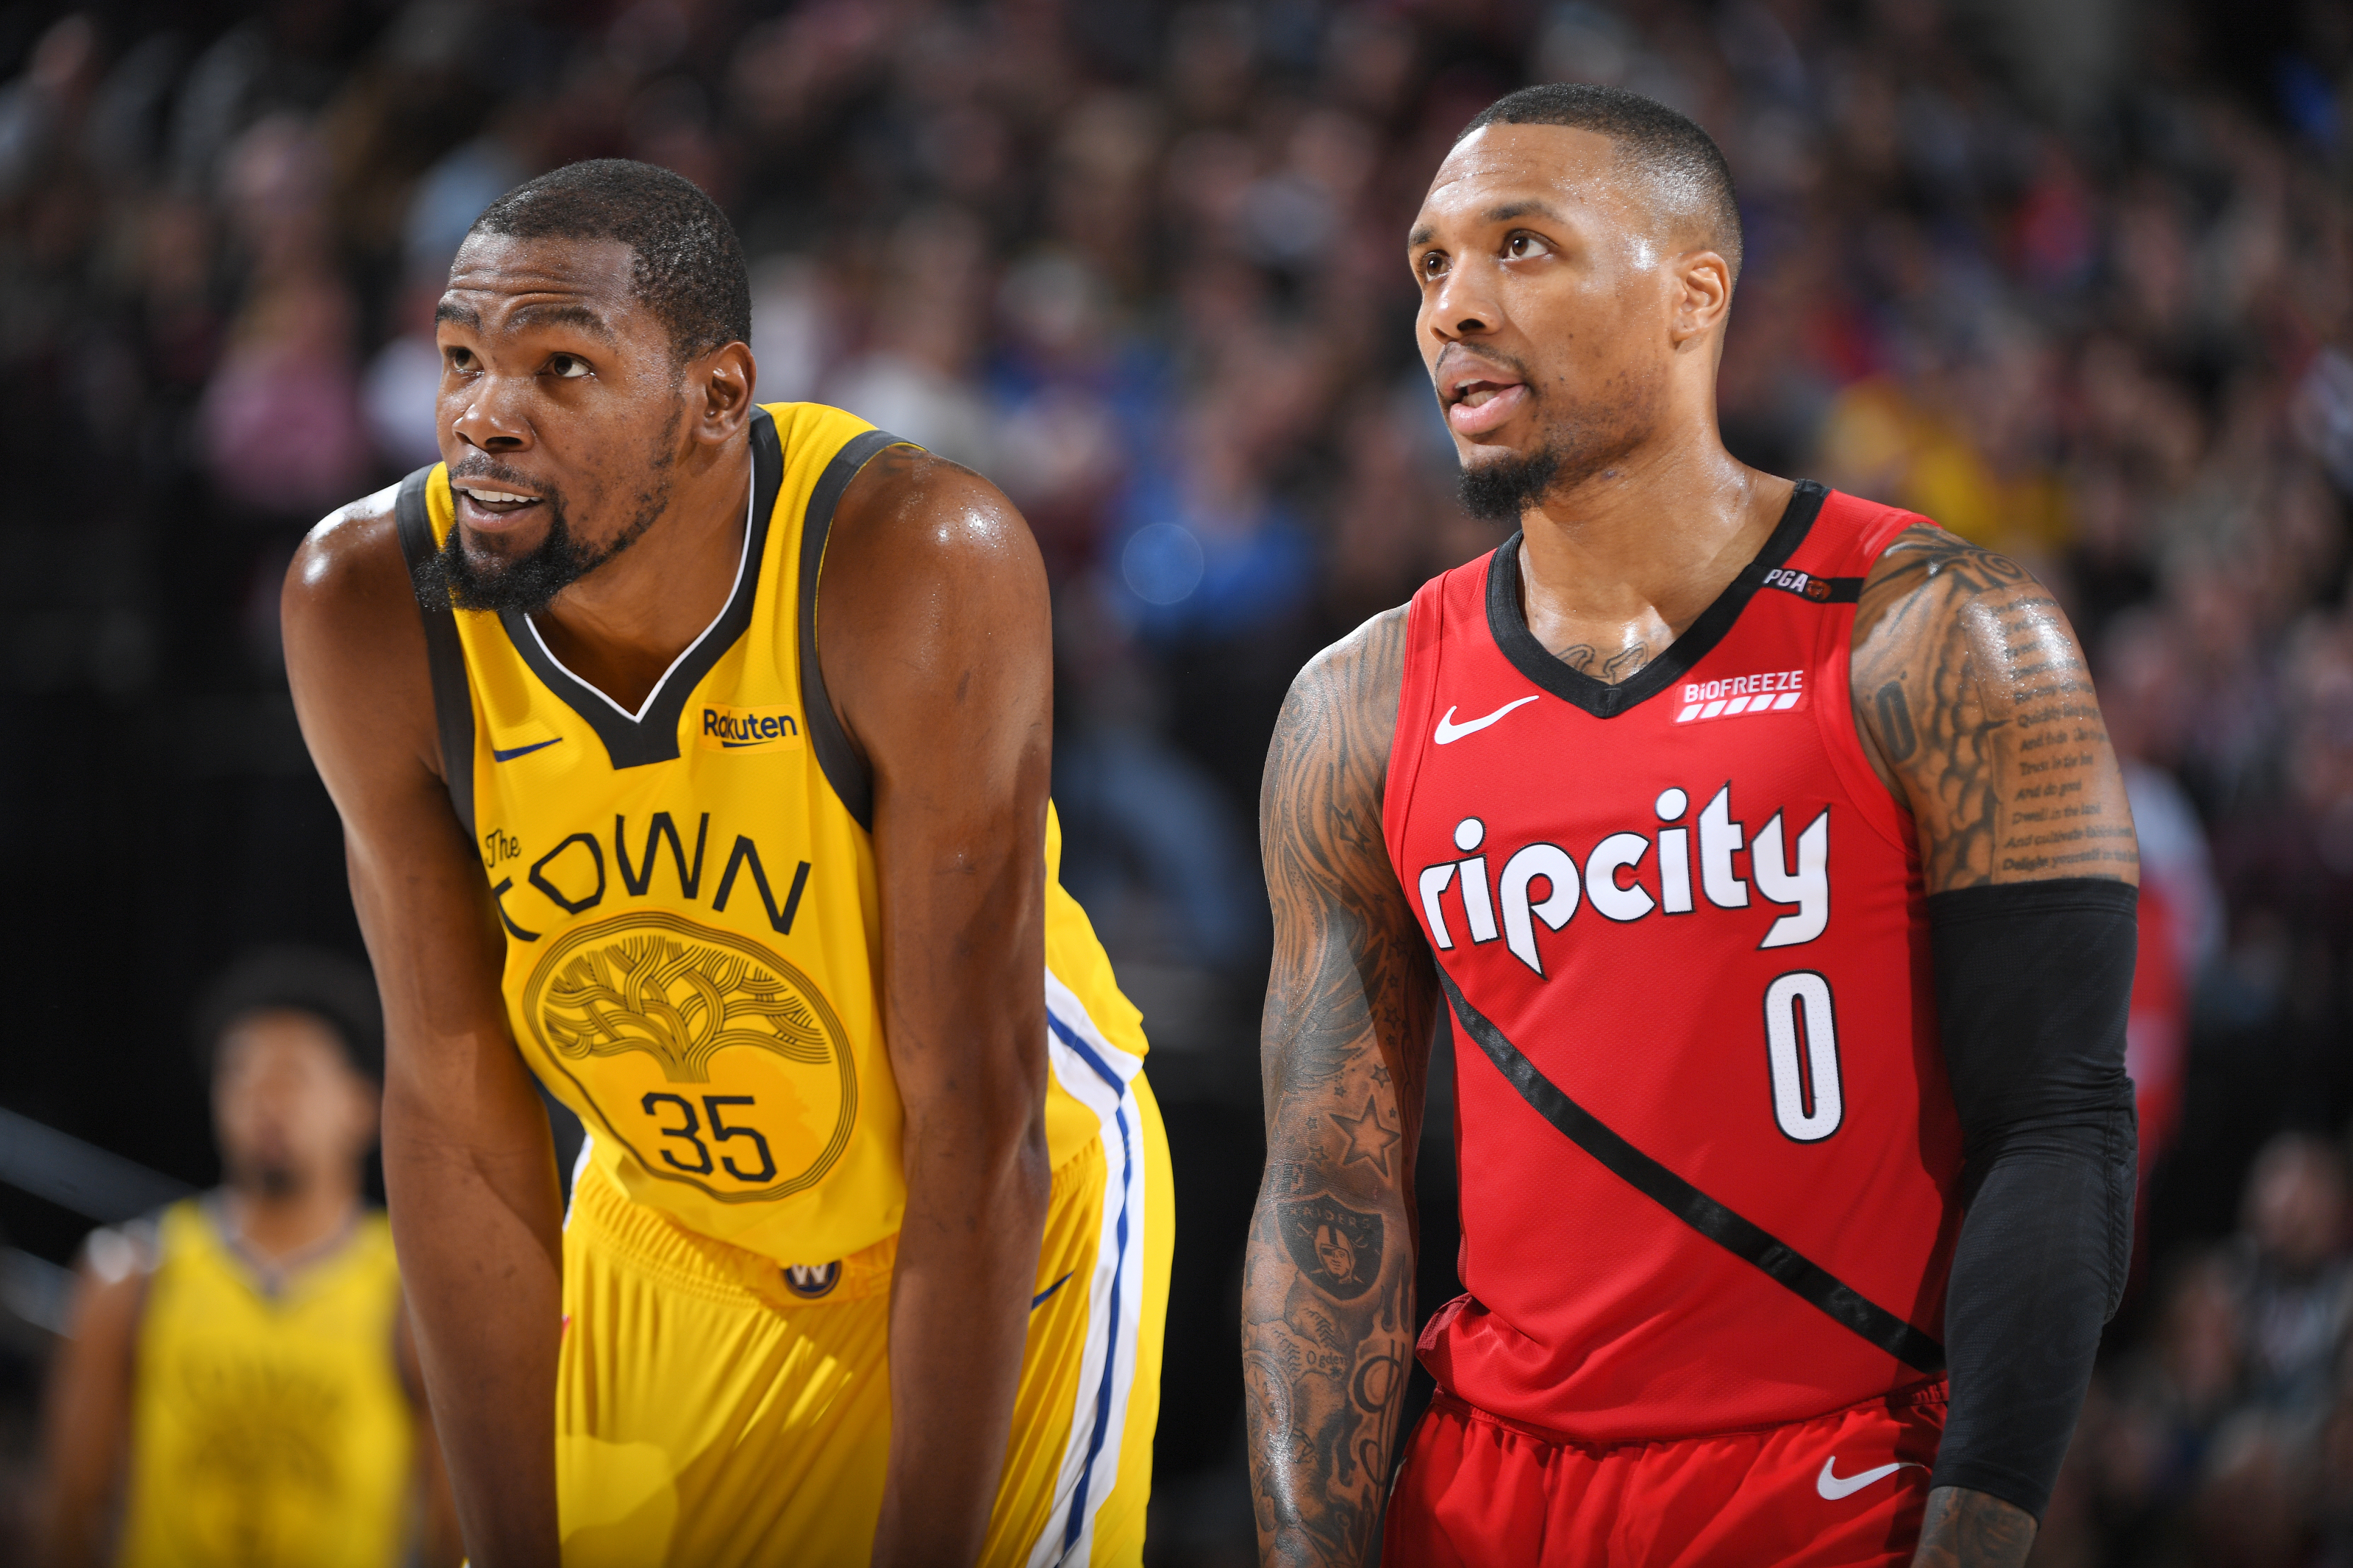 NBA scores 2014: Kevin Durant scores career-high 54, Blazers roll